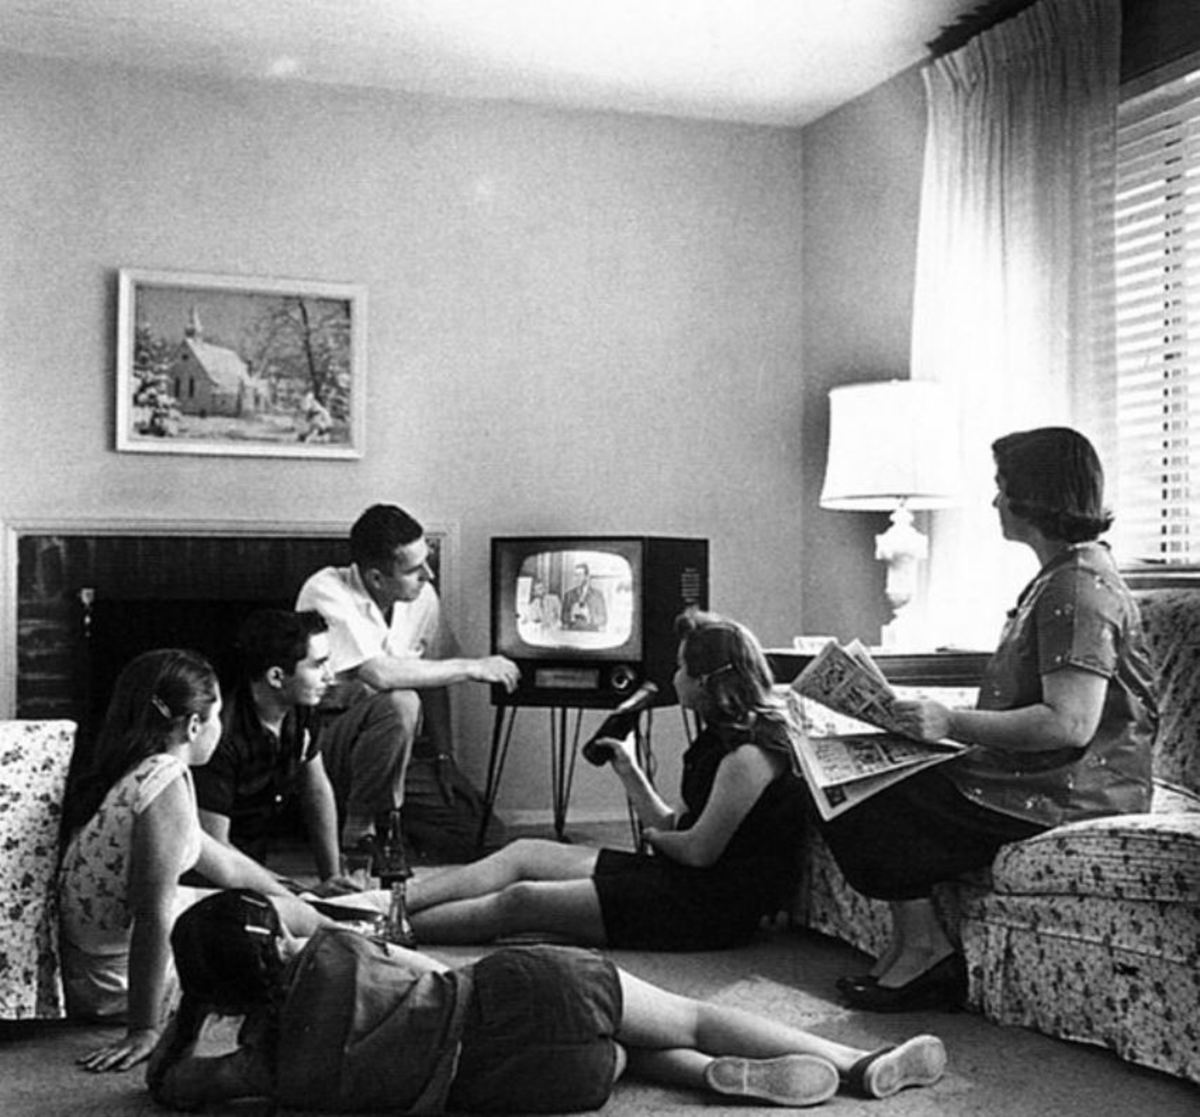 Plenty of American families were watching TV in the 1950s.